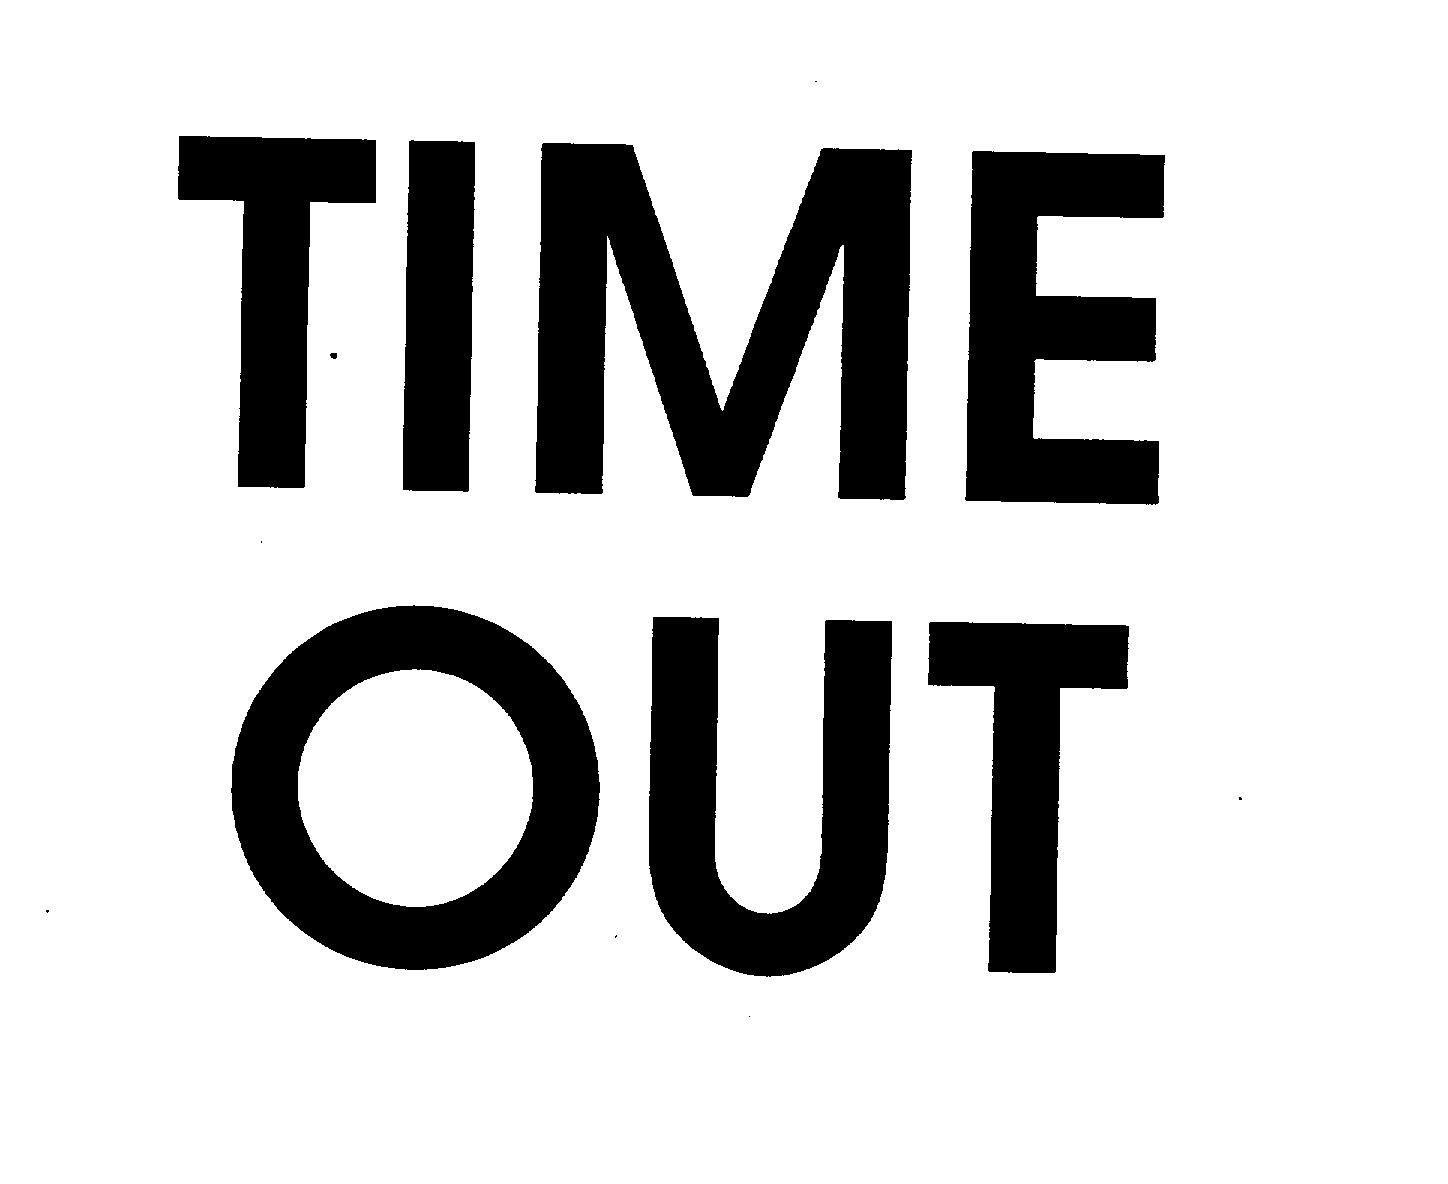 Trademark Logo TIME OUT